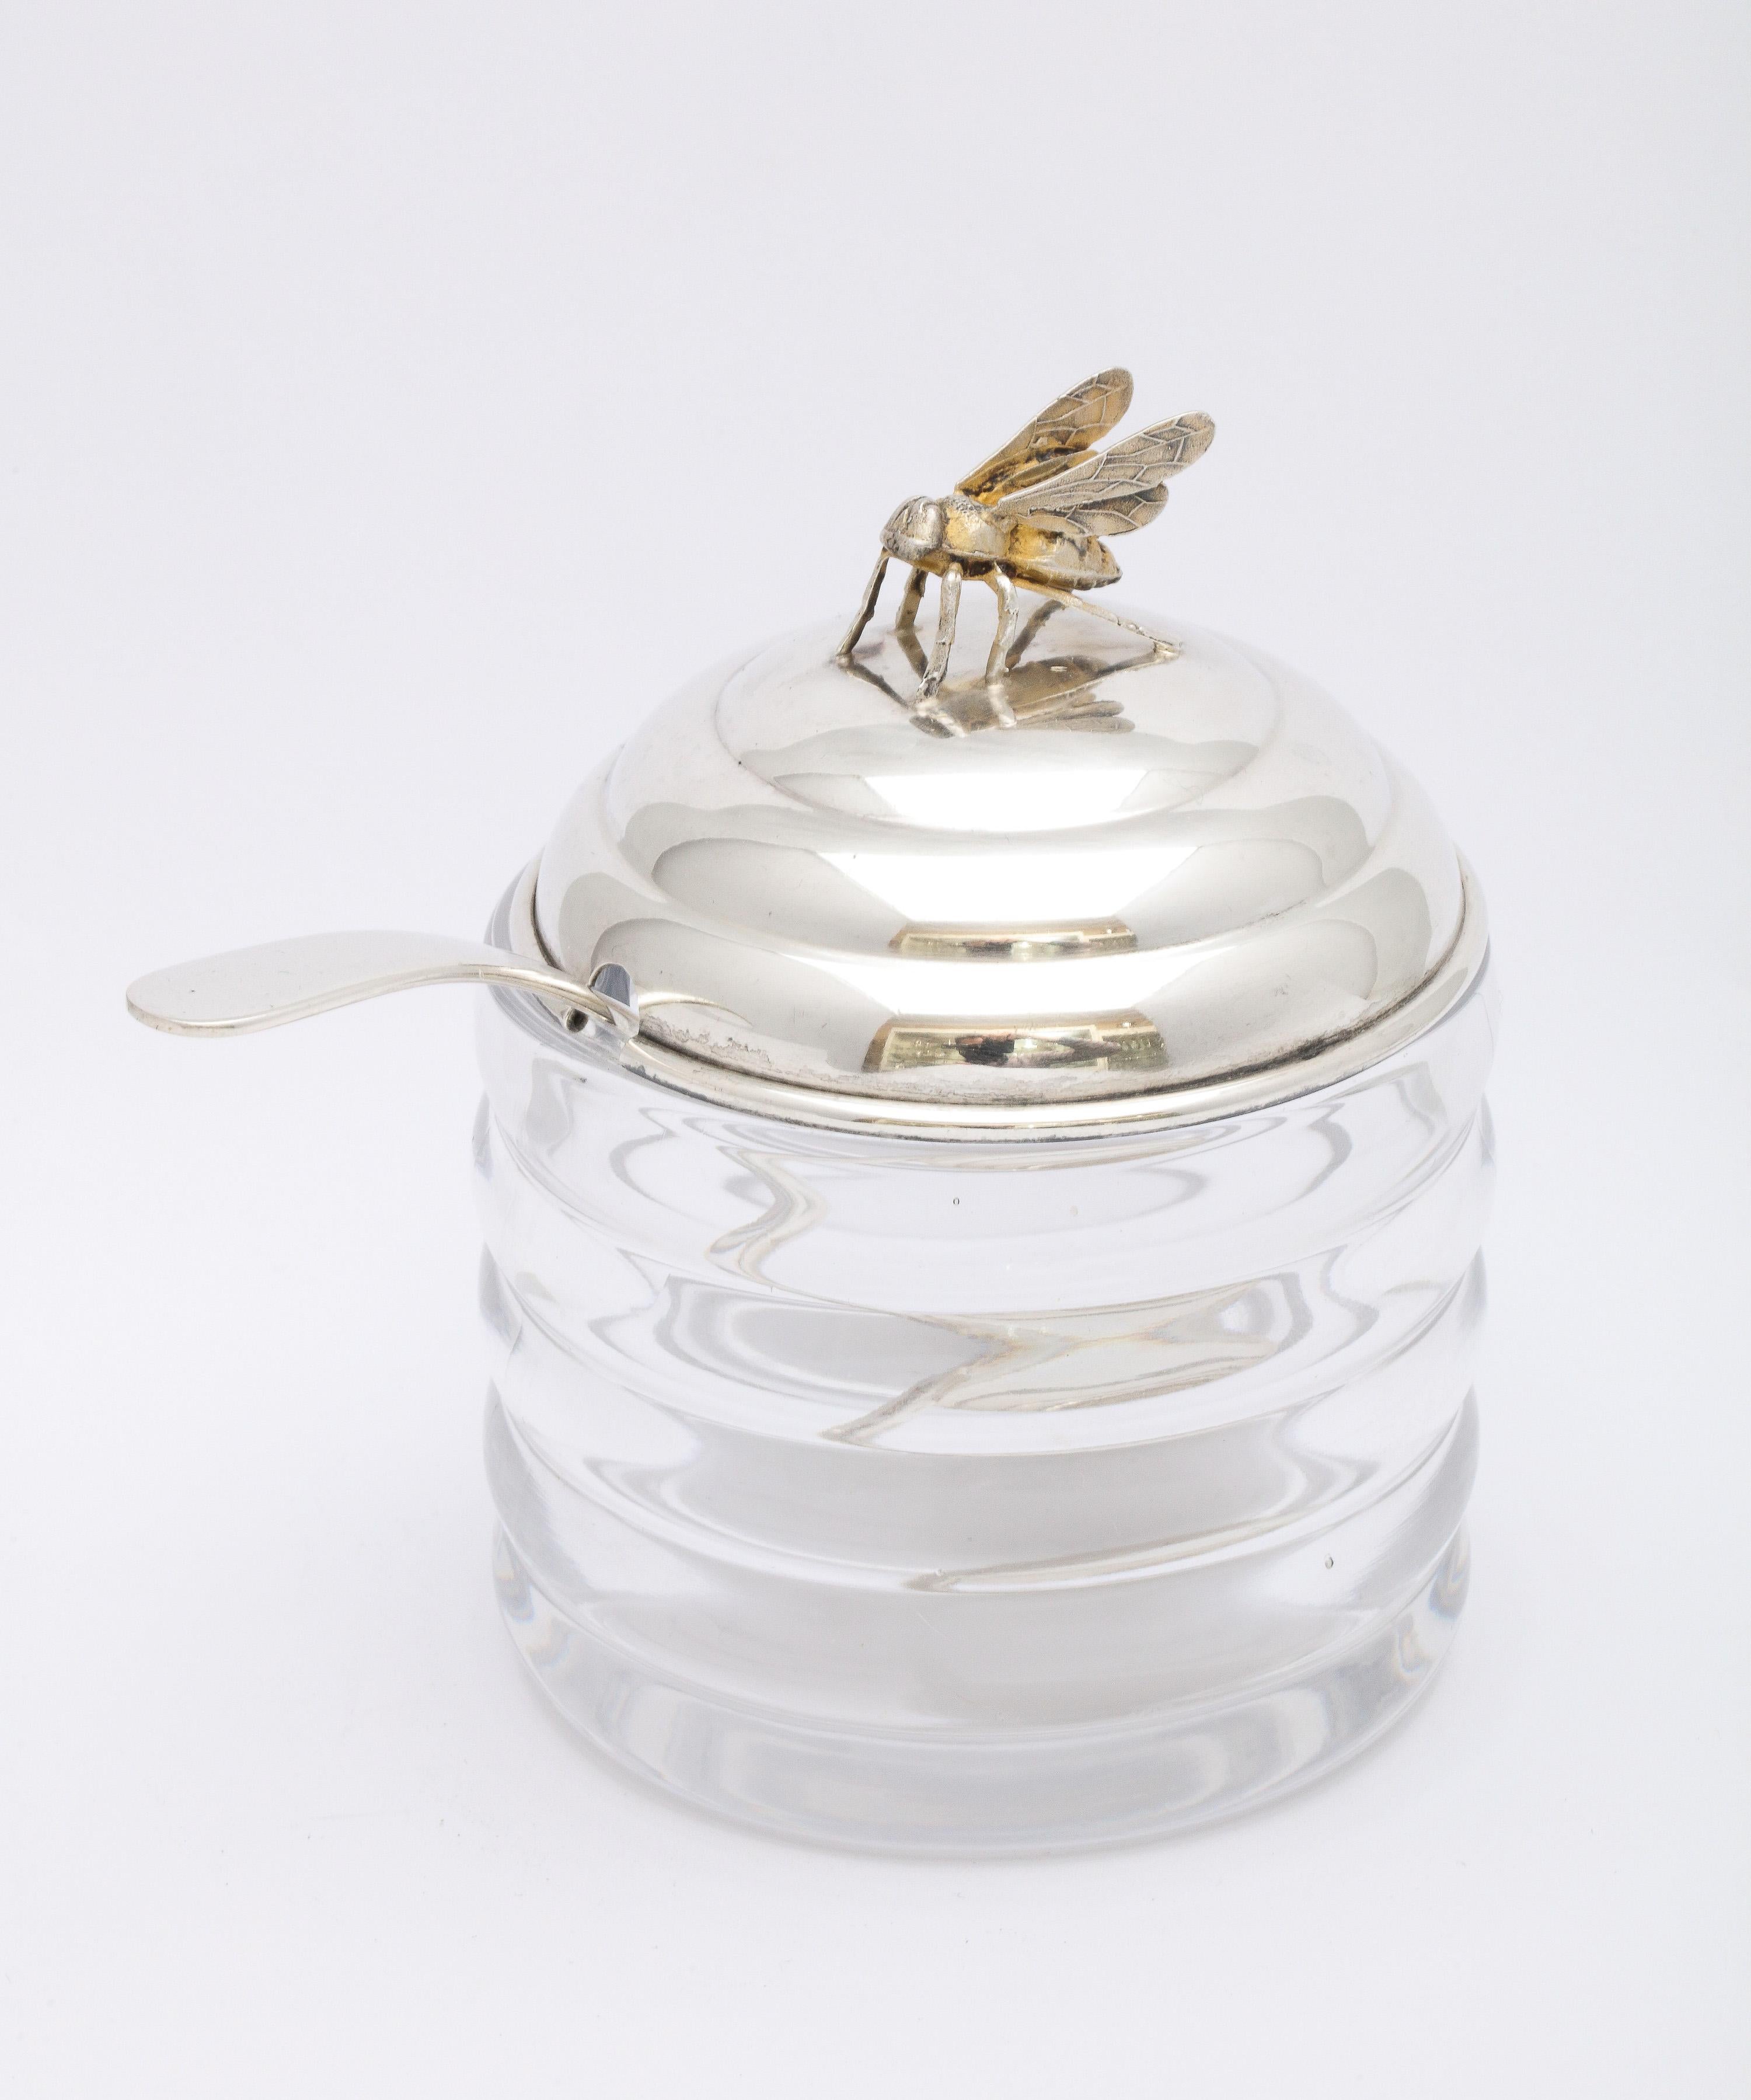 American Art Deco Period Sterling Silver-Mounted Beehive-Form Honey Jar